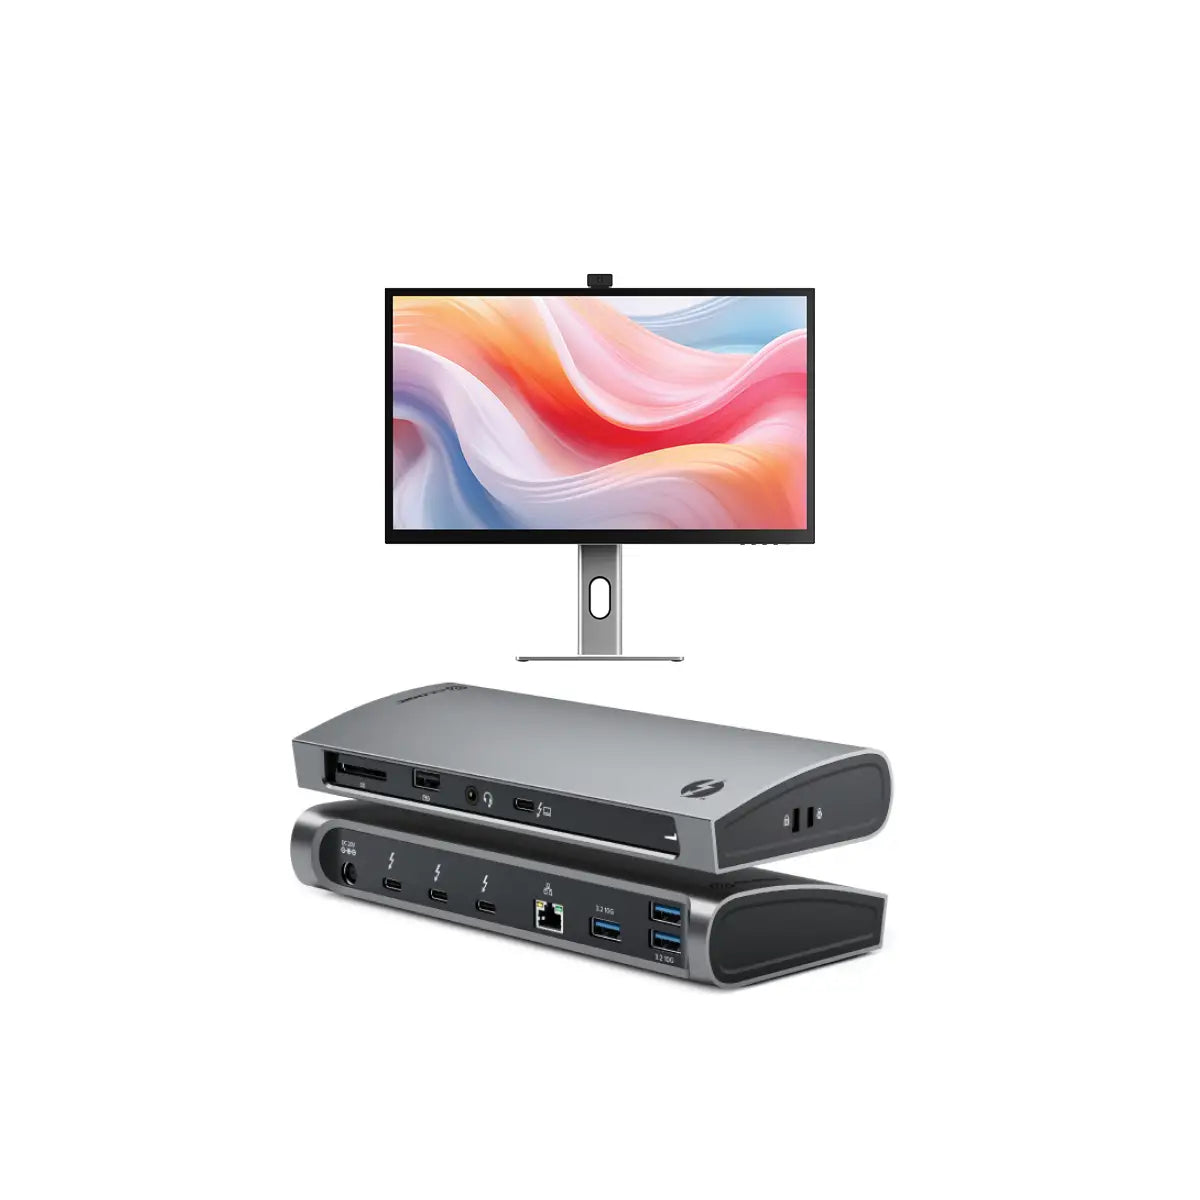 clarity-pro-27-uhd-4k-monitor-with-65w-pd-and-webcam-thunderbolt-4-blaze-docking-station1